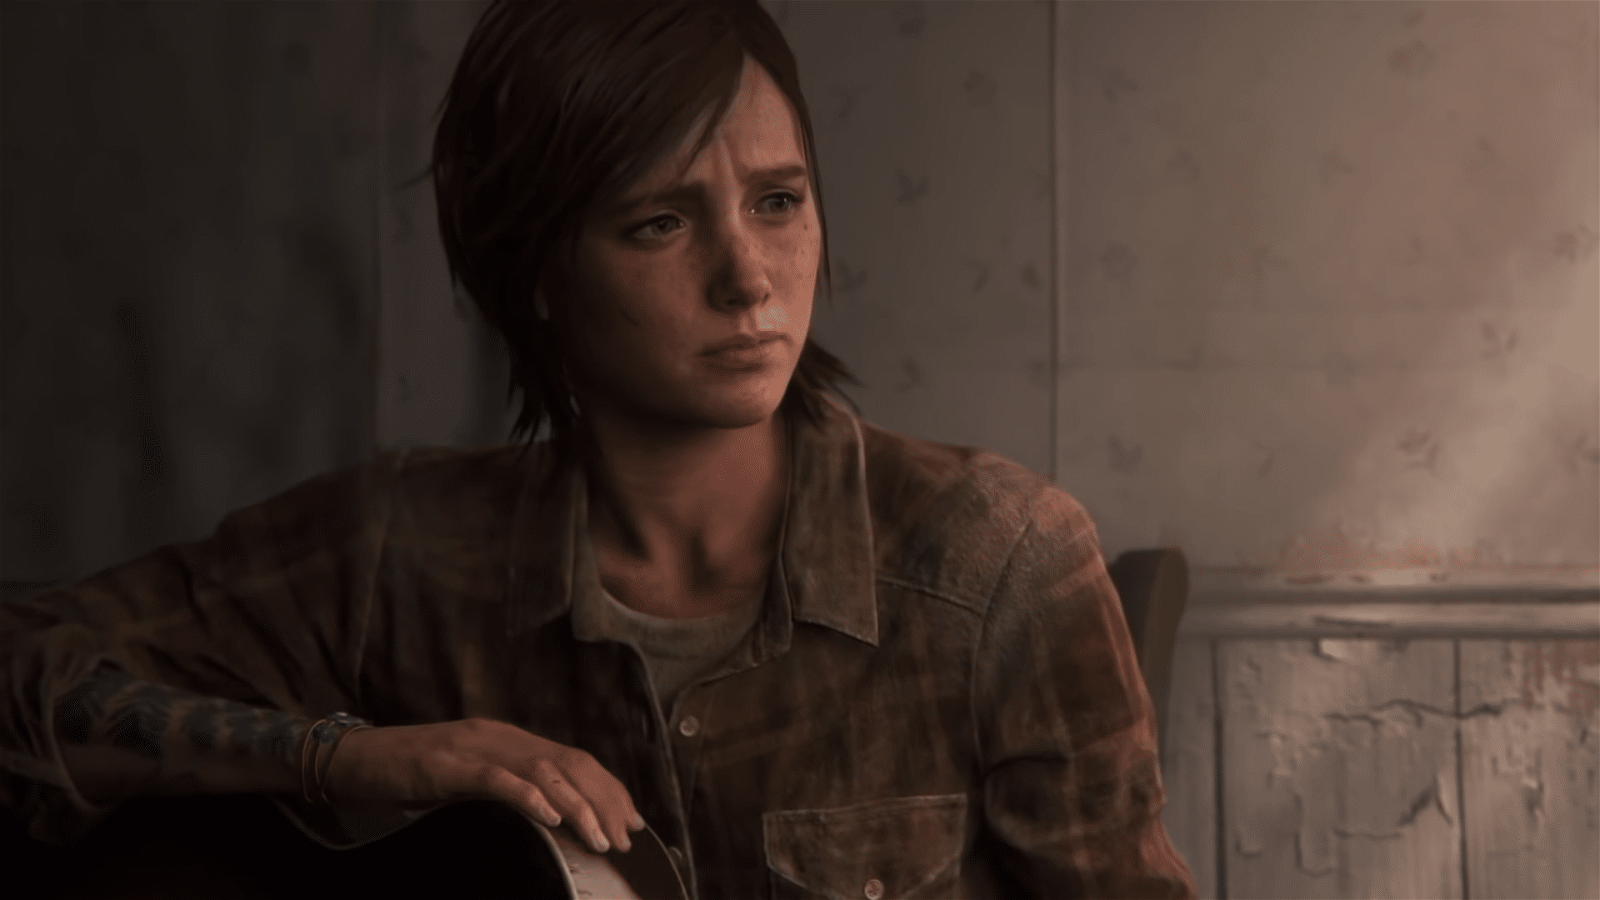 Last of Us Part II Gameplay Review, Story Spoilers - What Happens to Joel,  Ellie, and Abby